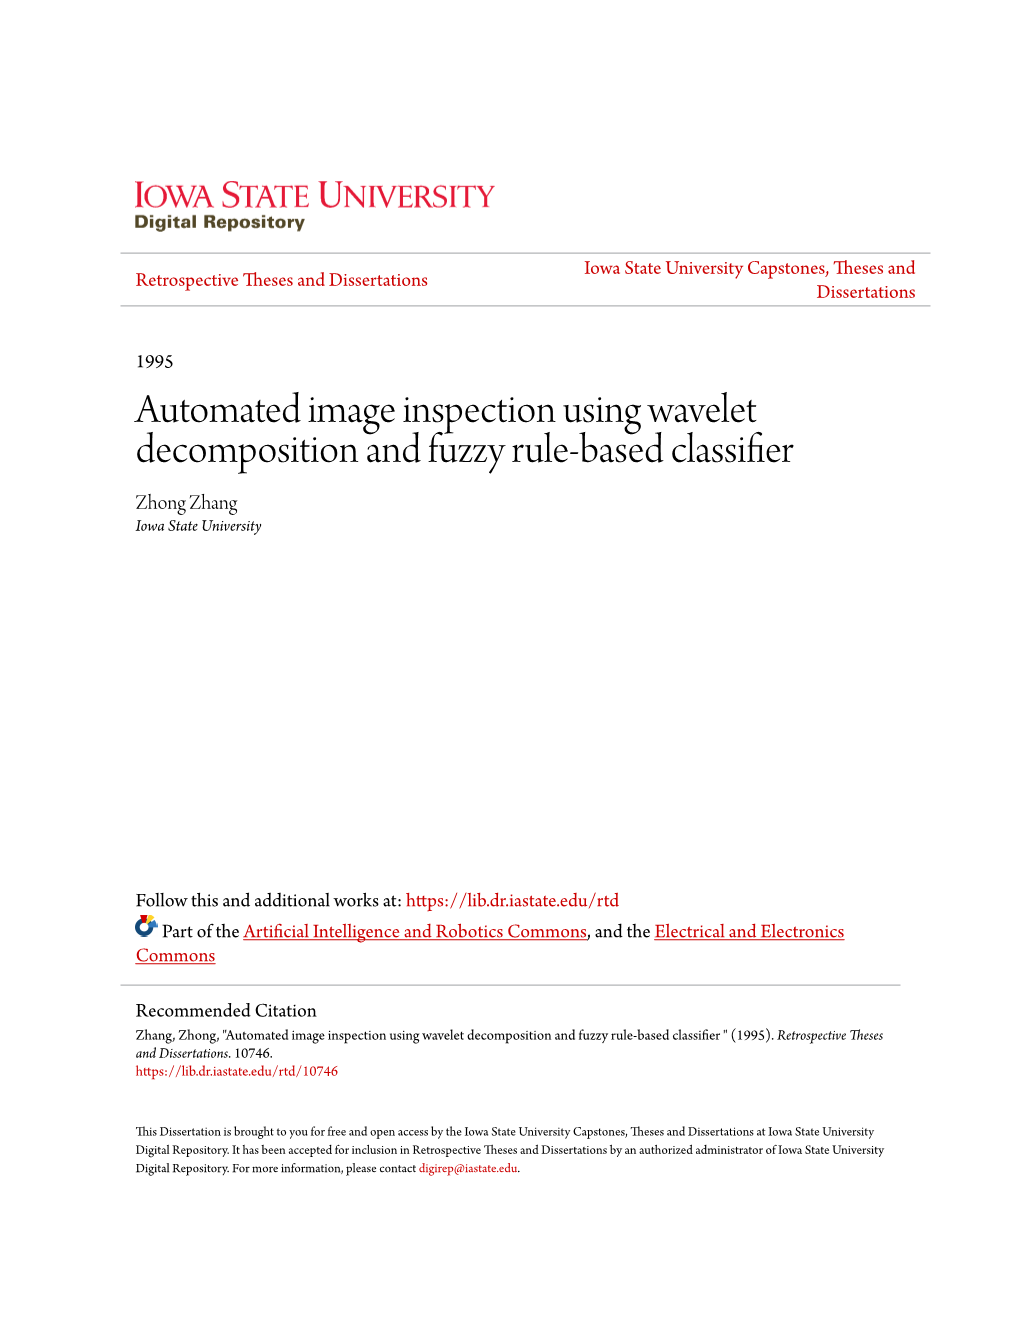 Automated Image Inspection Using Wavelet Decomposition and Fuzzy Rule-Based Classifier Zhong Zhang Iowa State University